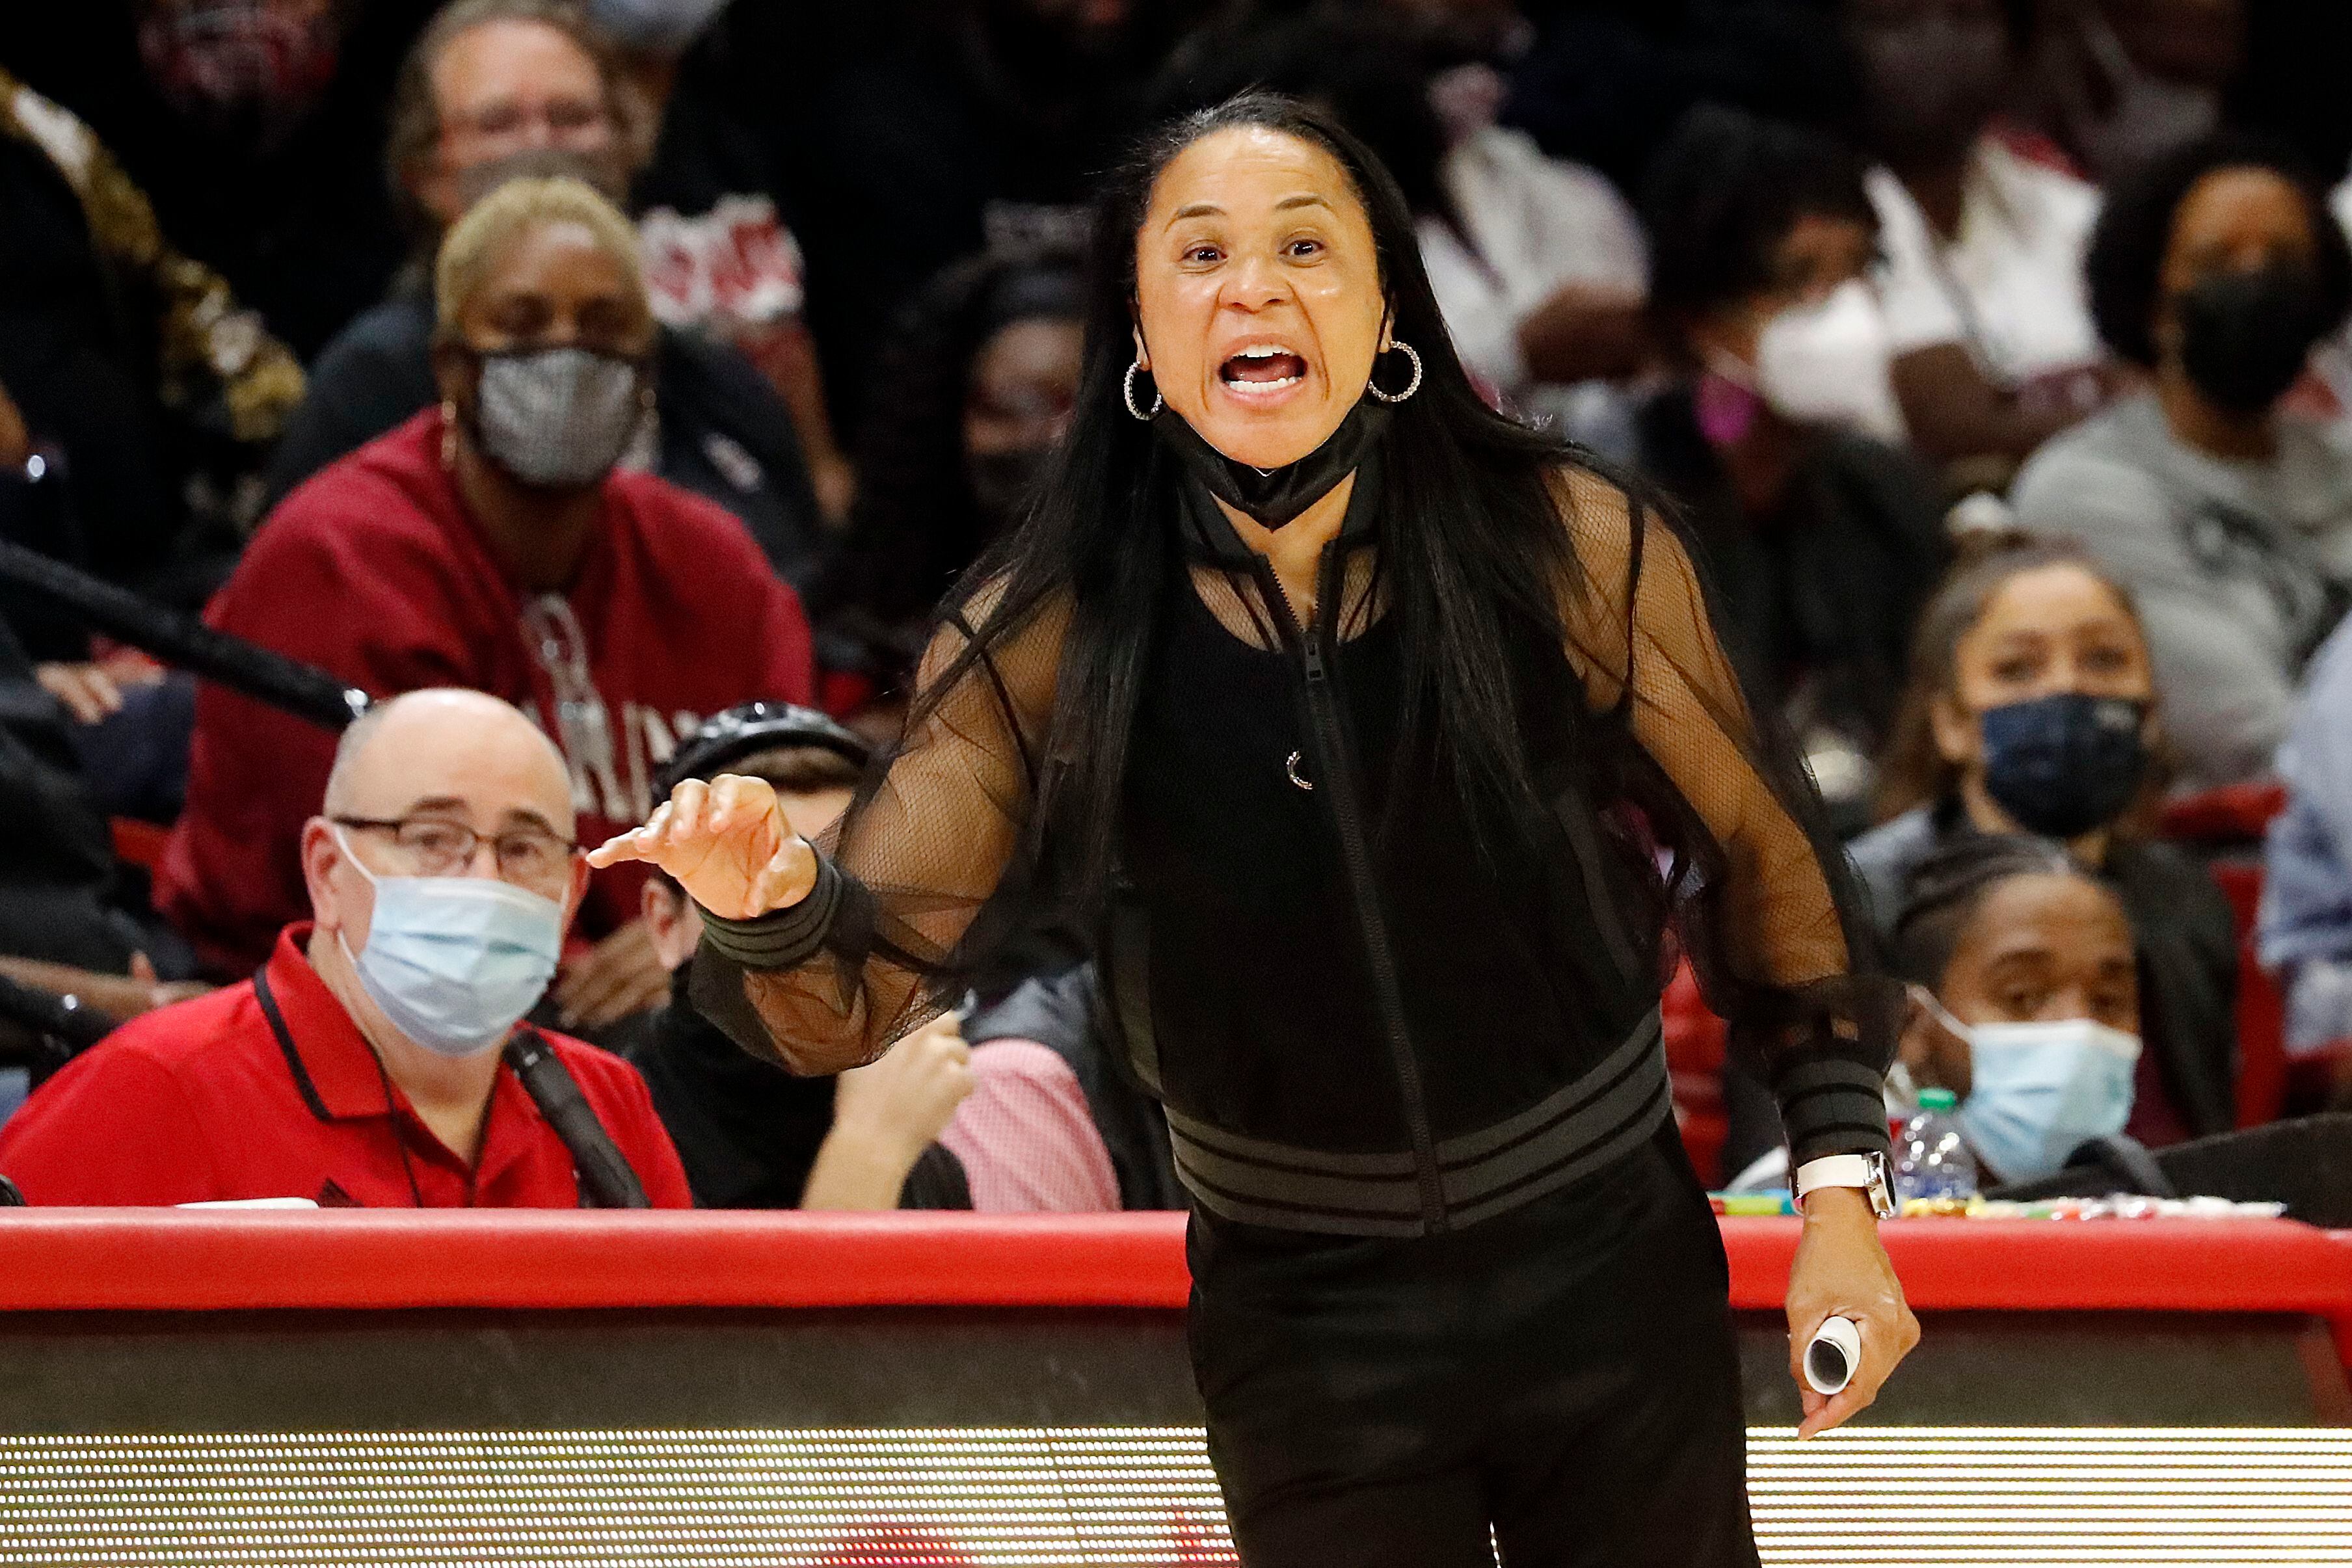 Dawn Staley gets new $22.4 million, 7-year contract